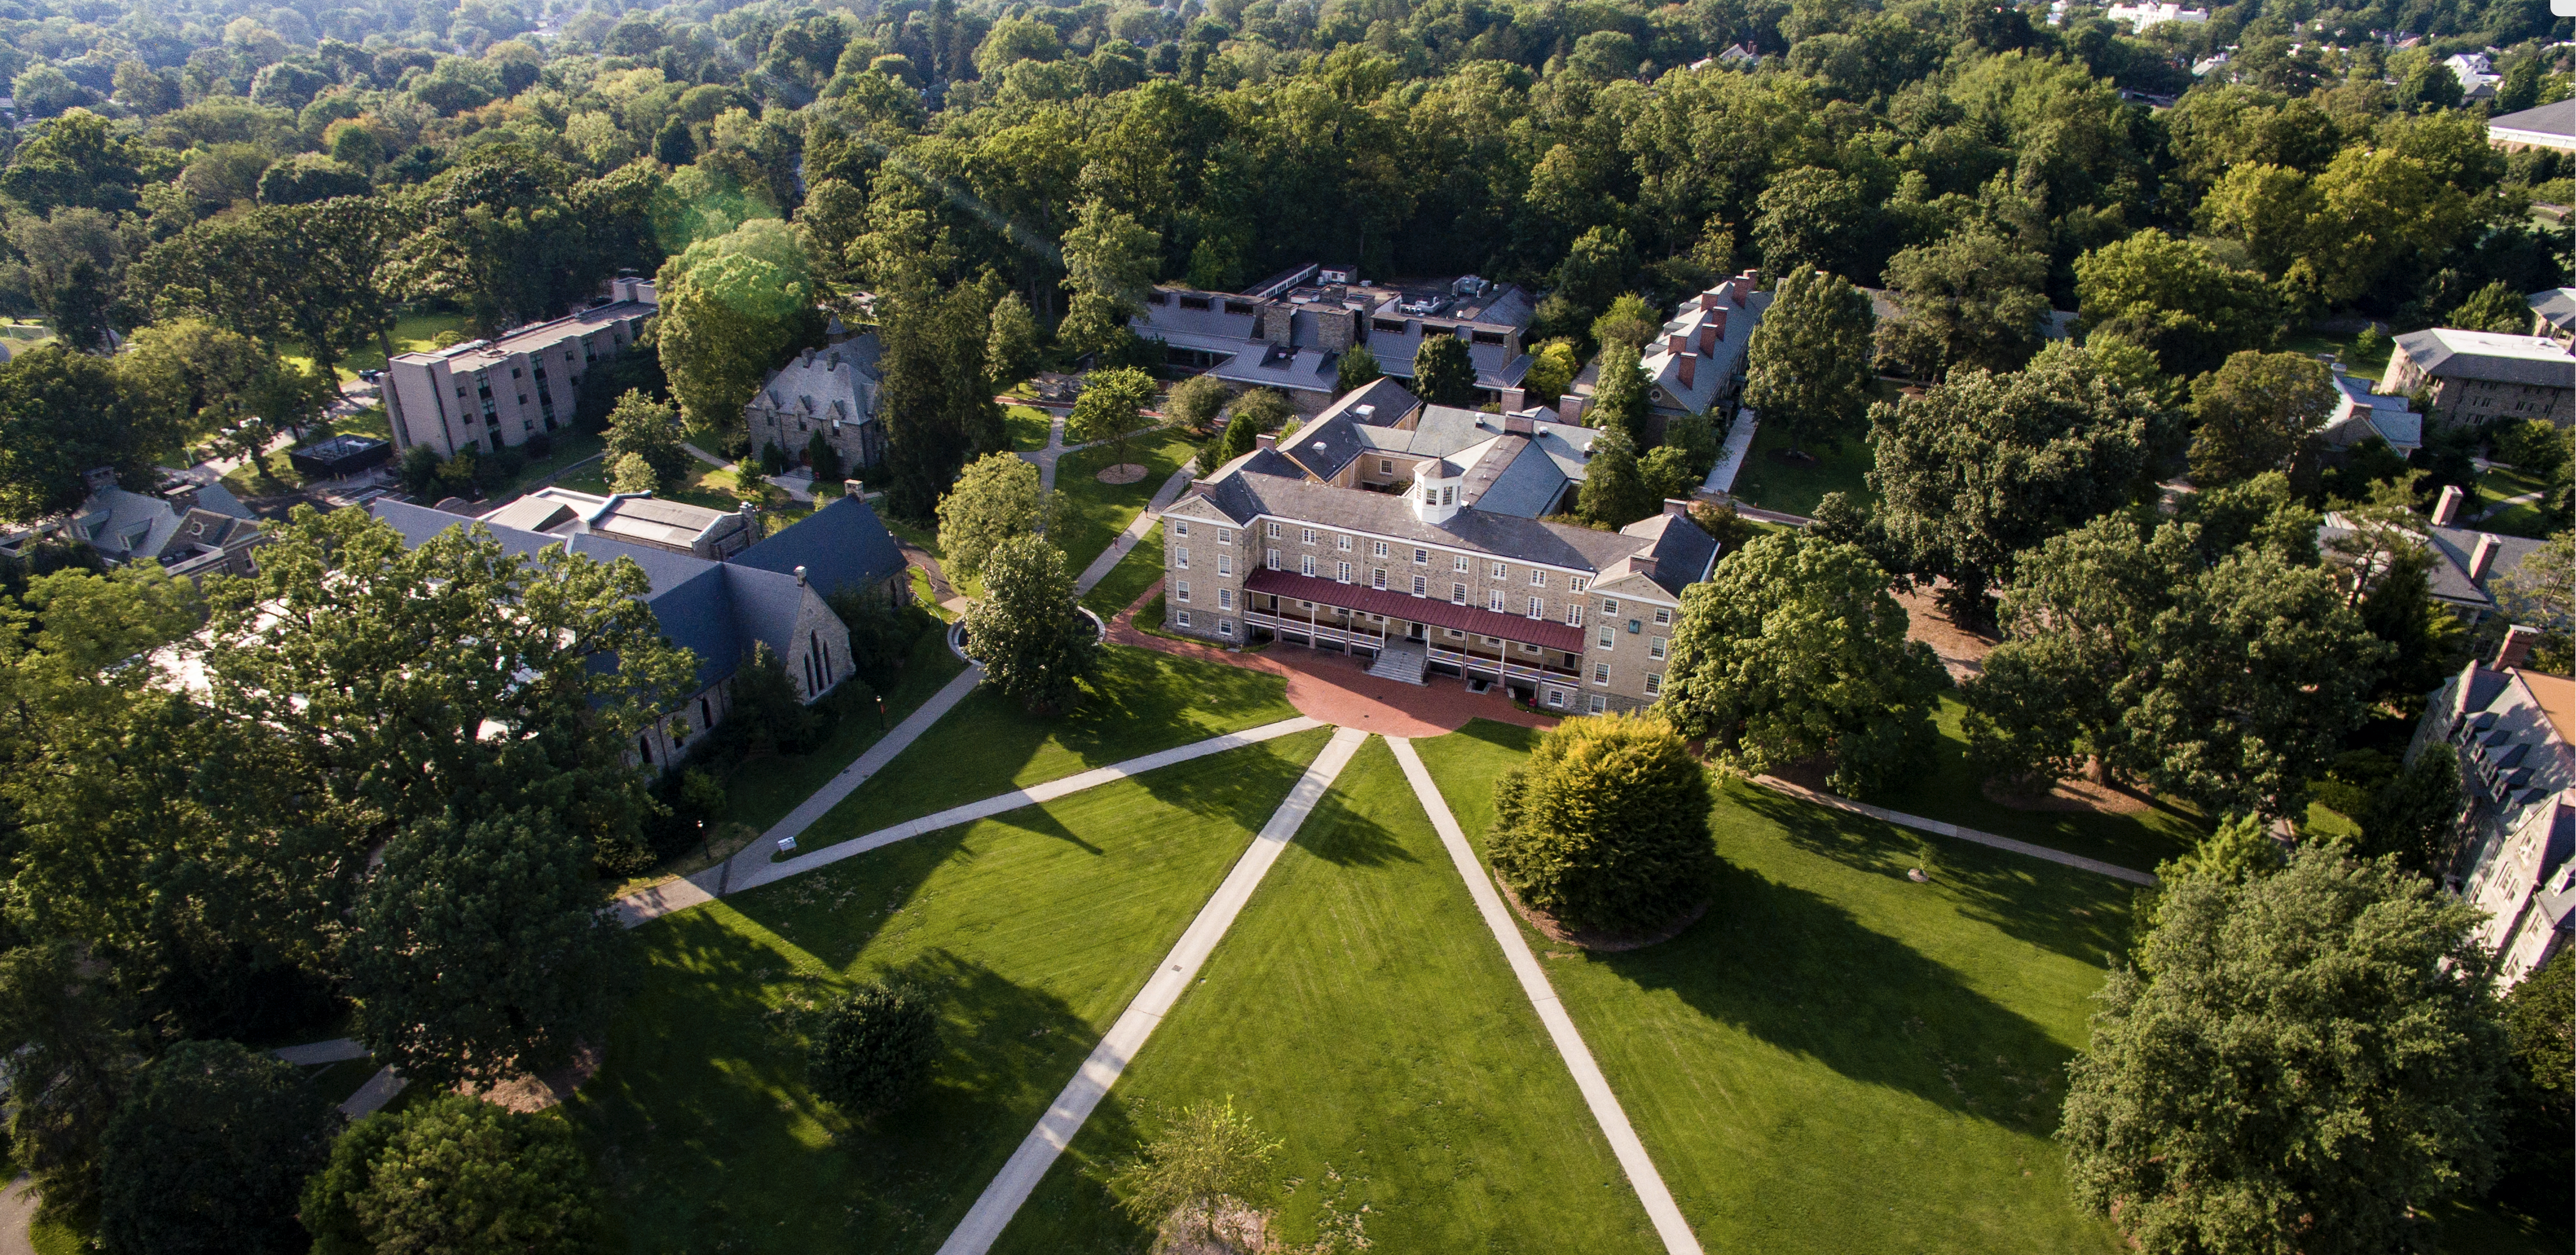 Haverford College